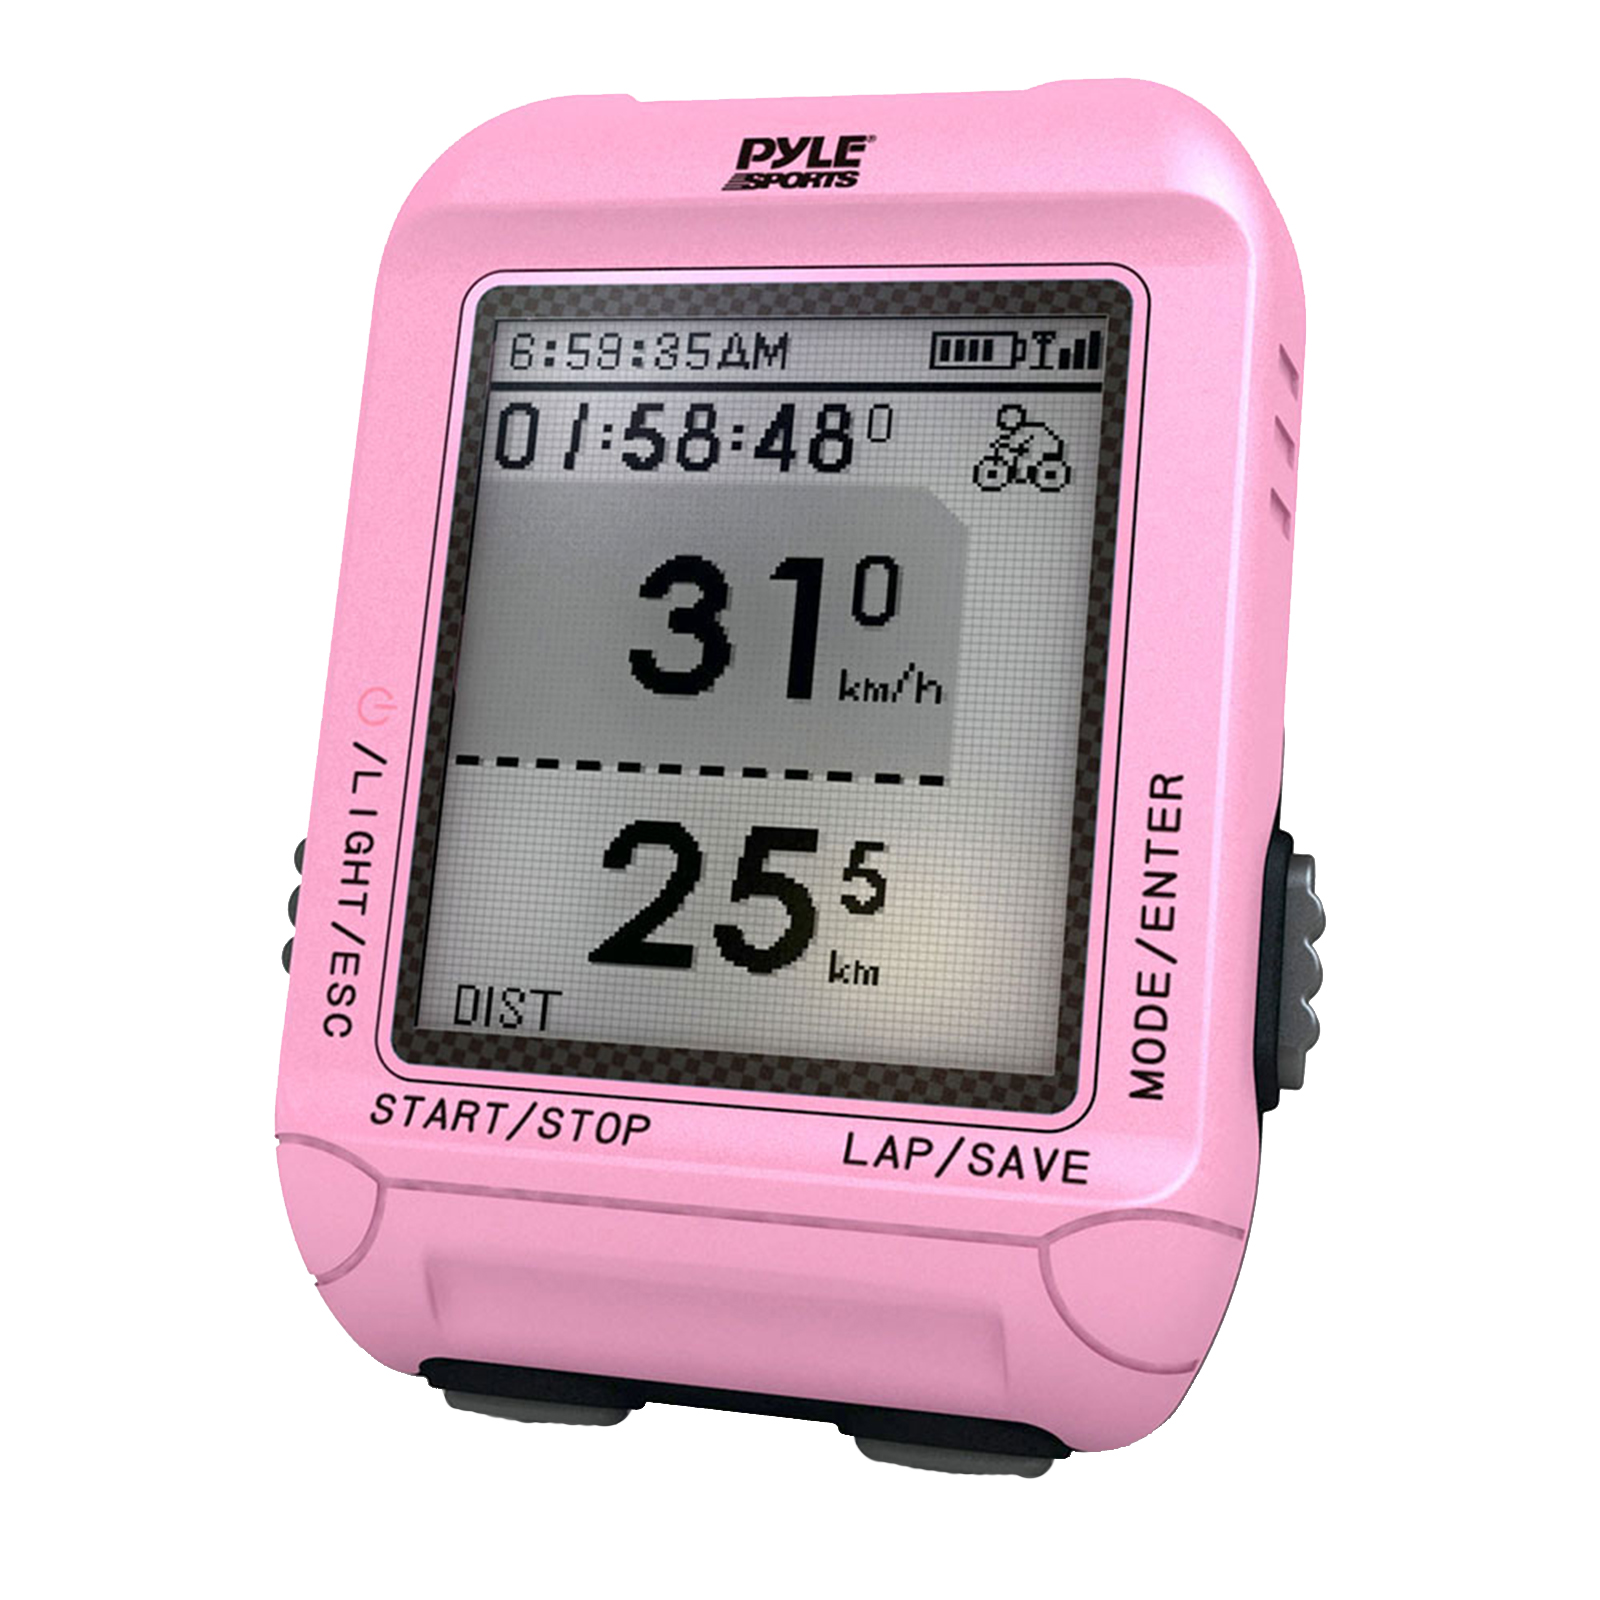 Smart Bicycling Computer with GPS Performance & Navigation Analysis Software and ANT+ Technology for Biking, Training, Exercise, Fitness (Pink Color) - image 1 of 1